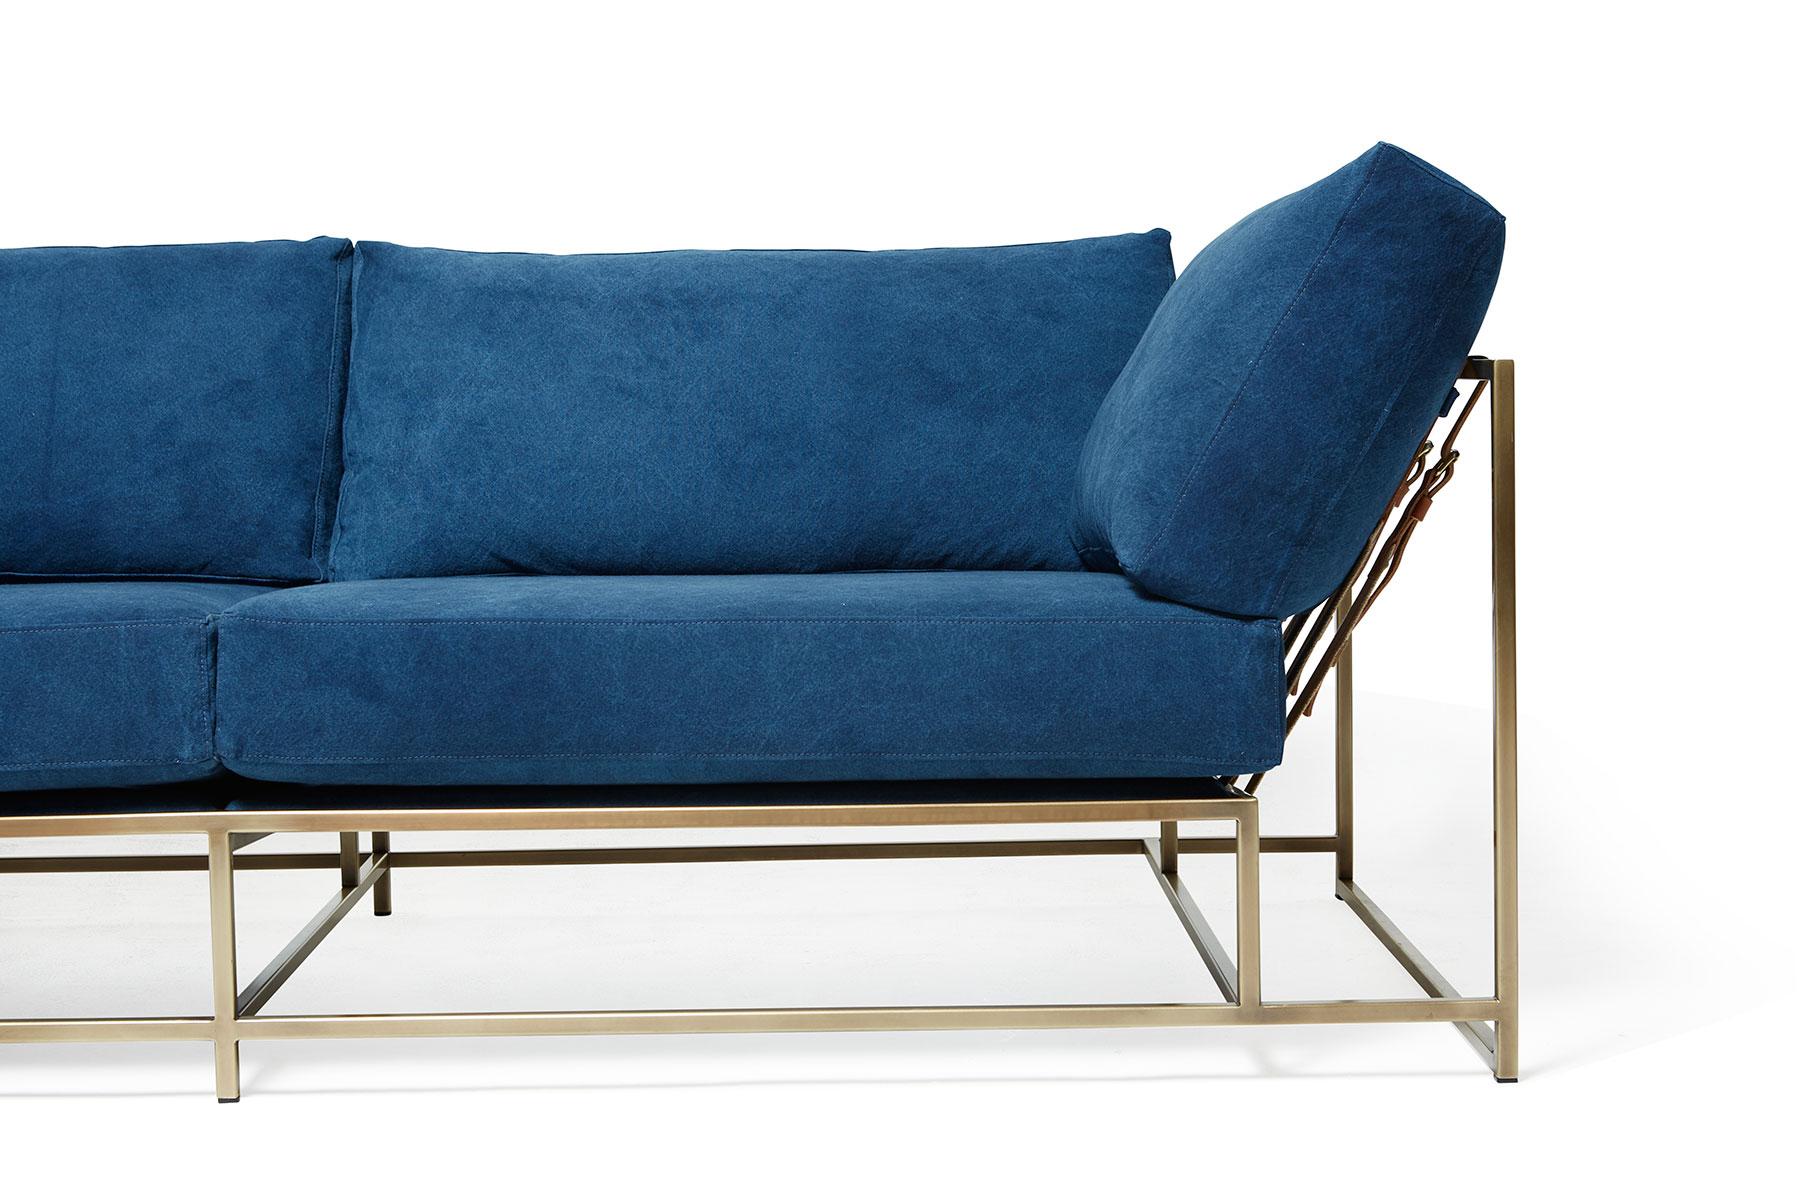 American Hand-Dyed Indigo Canvas and Antique Brass Two-Seat Sofa For Sale